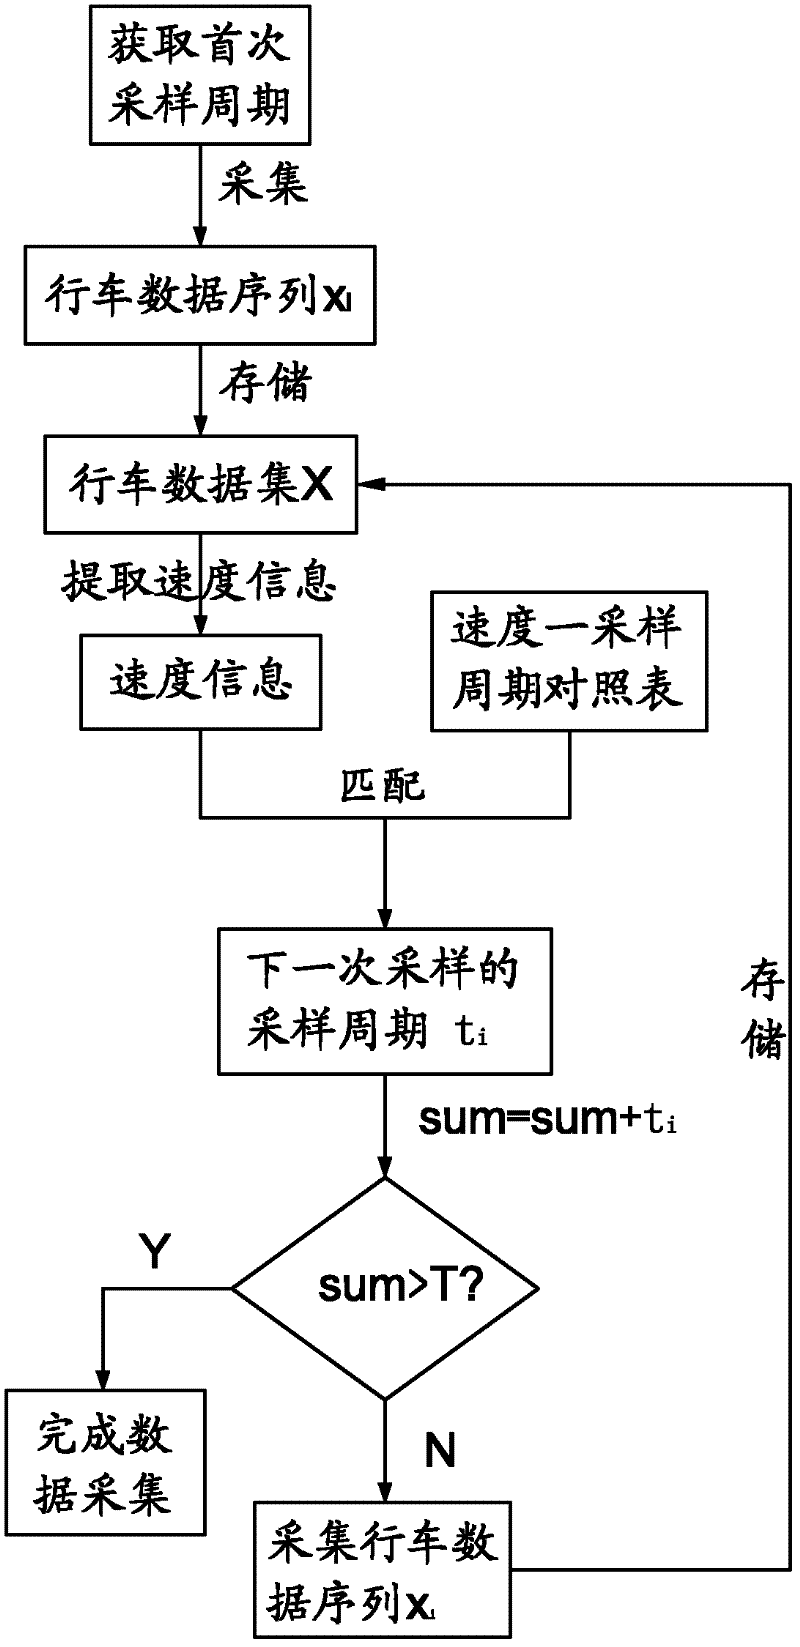 Pre-processing method for data collection based on floating car